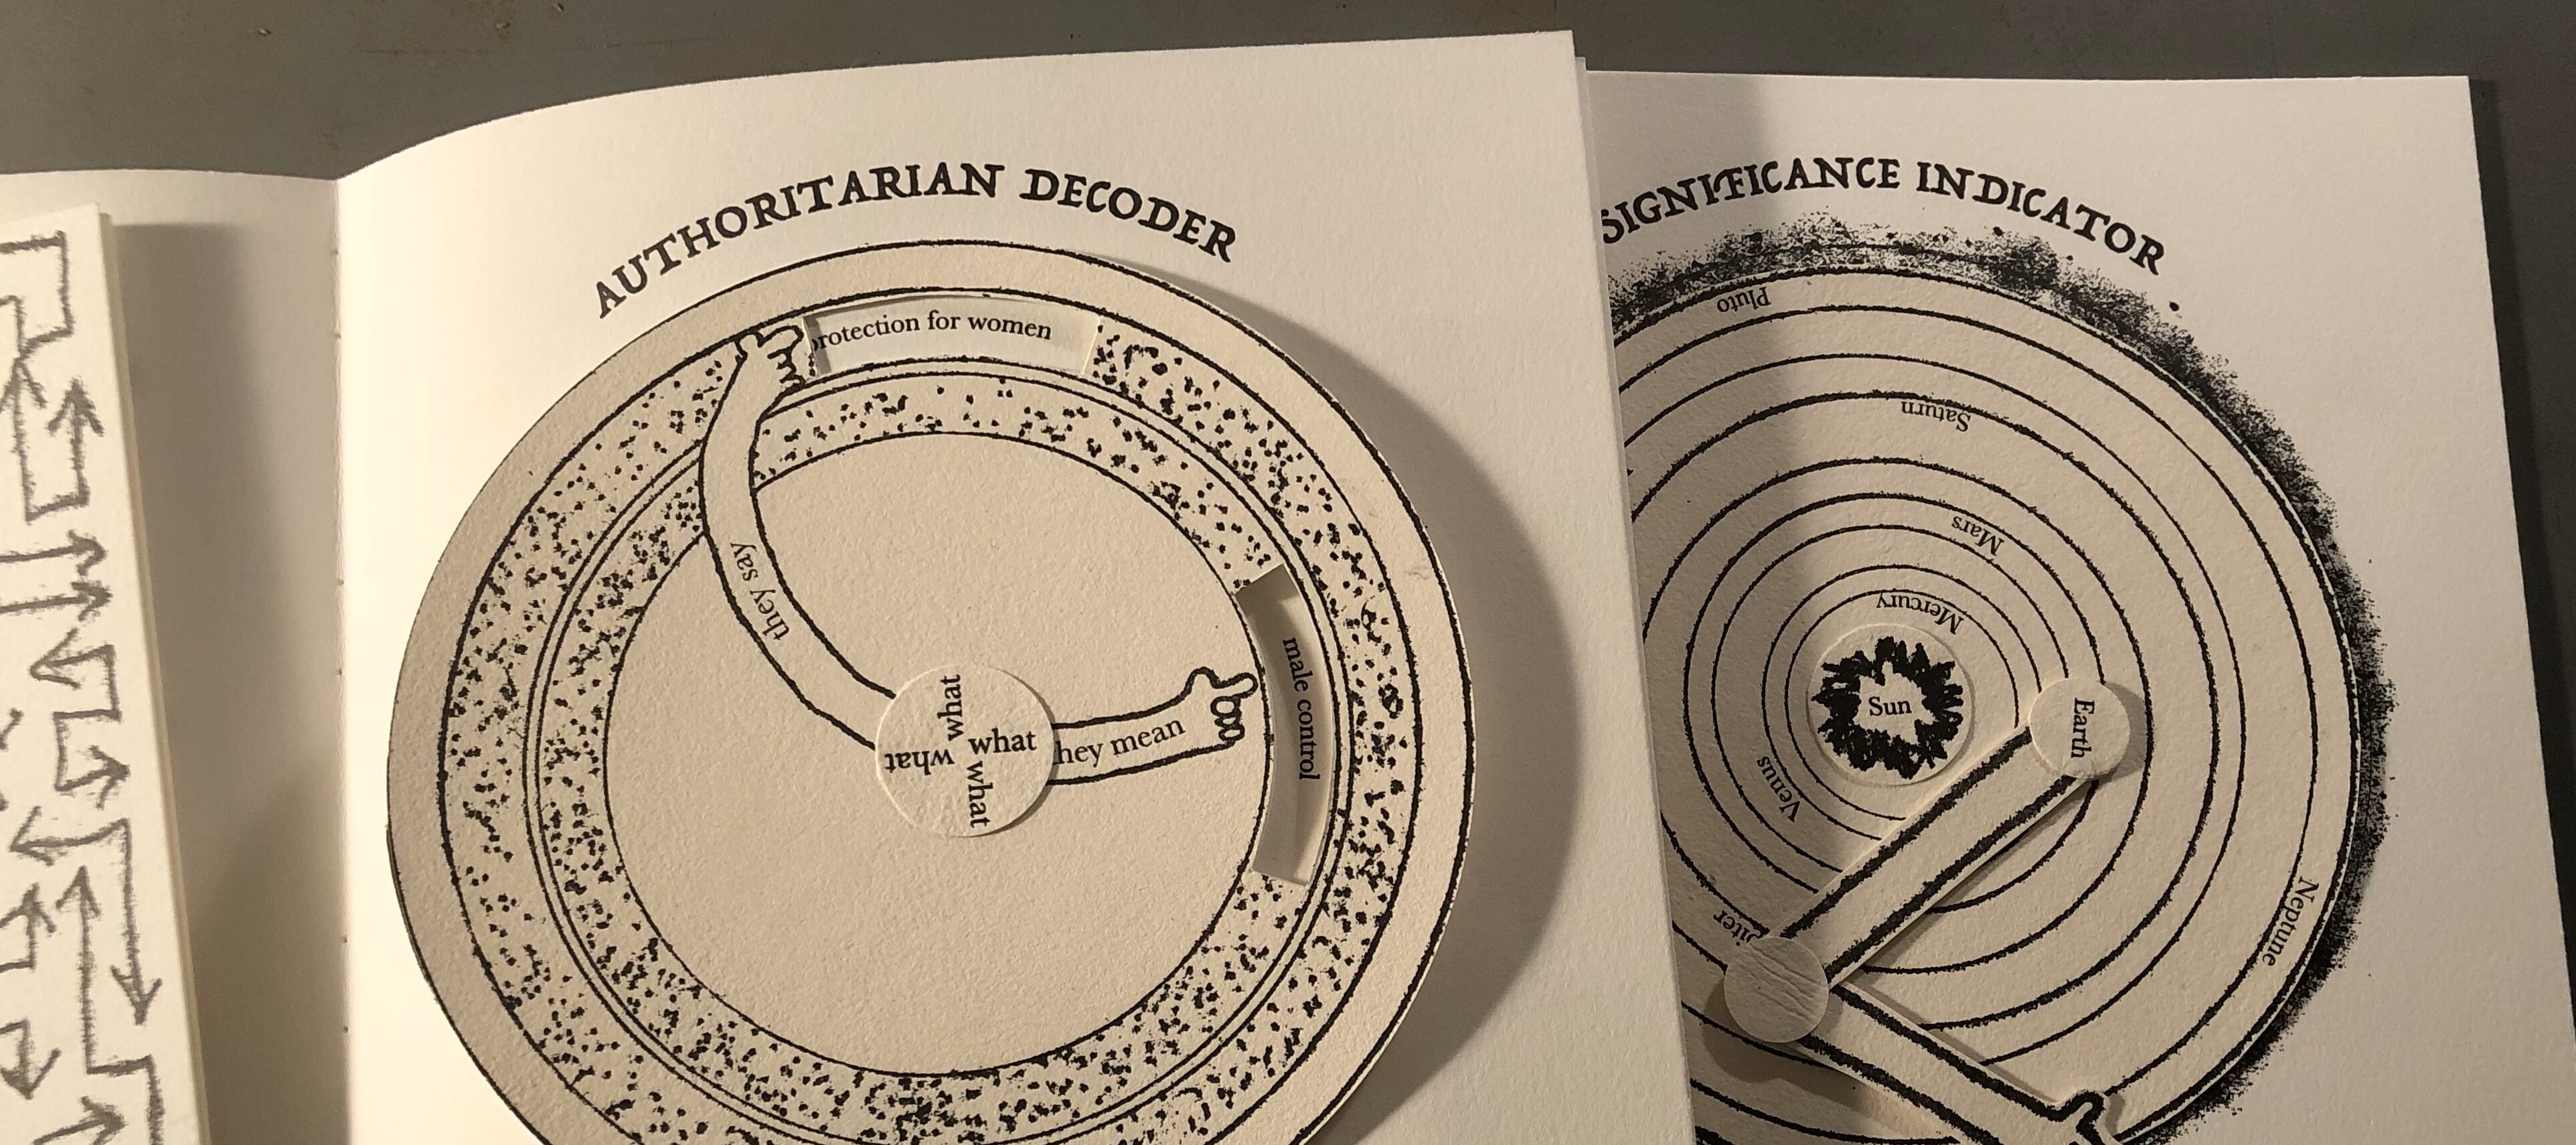 Two examples of volvelle books with circular pages that can be rotated by the reader to reveal and conceal content. One is titled "Authoritarian Decoder" and reads "what they say: protection for women; what they mean: male control." The other is titled "Significance Indicator" and has the solar system's planets and orbits printed on the circle.